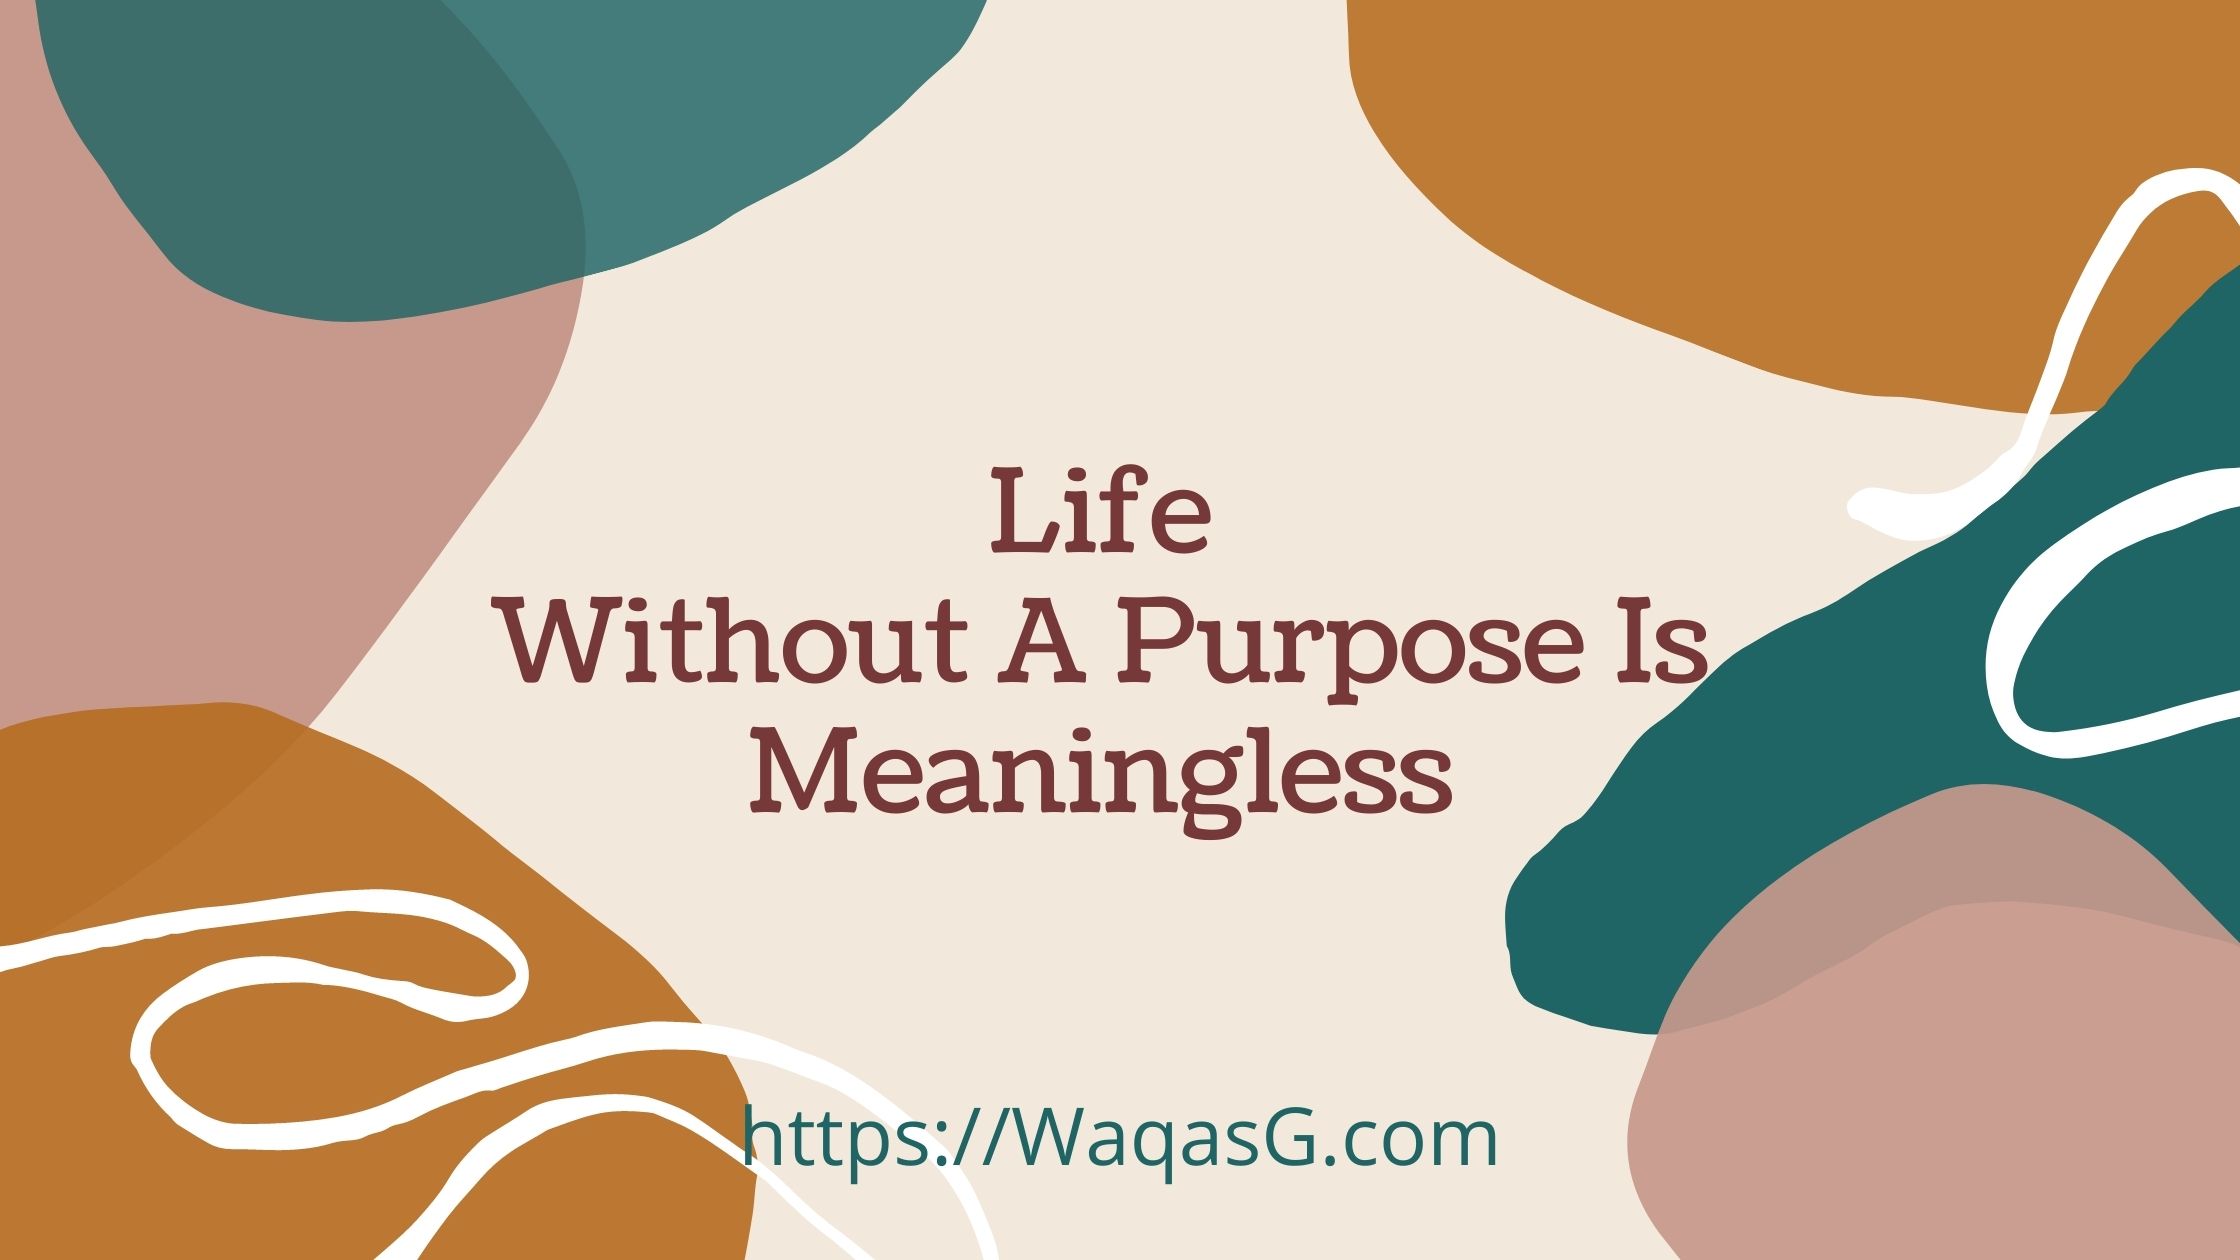 Life Without A Purpose Is Meaningless